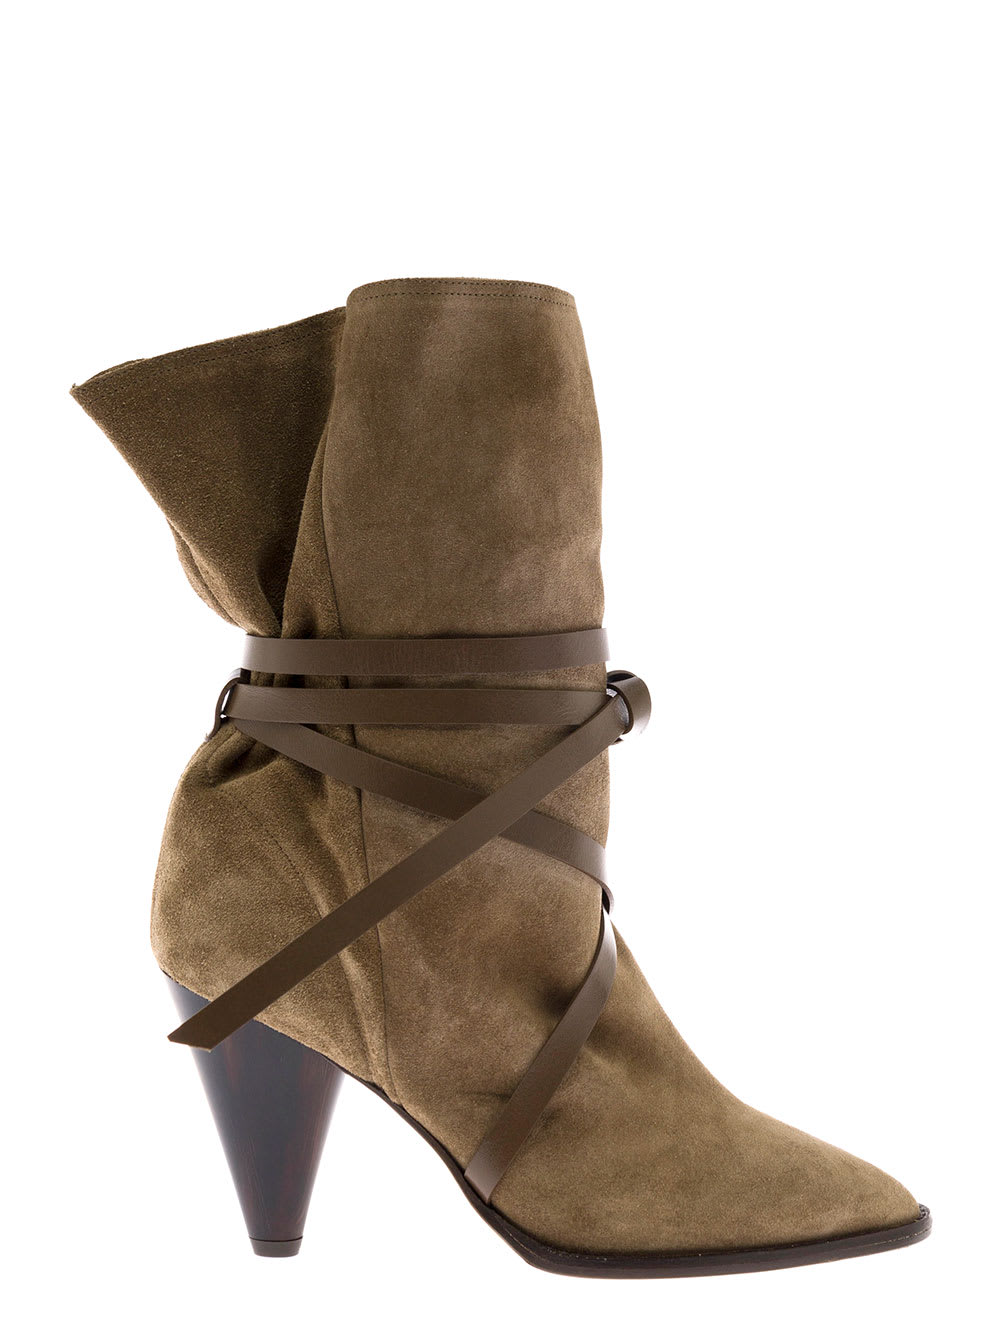 Isabel Marant Womans Beige Lidly Suede Boots